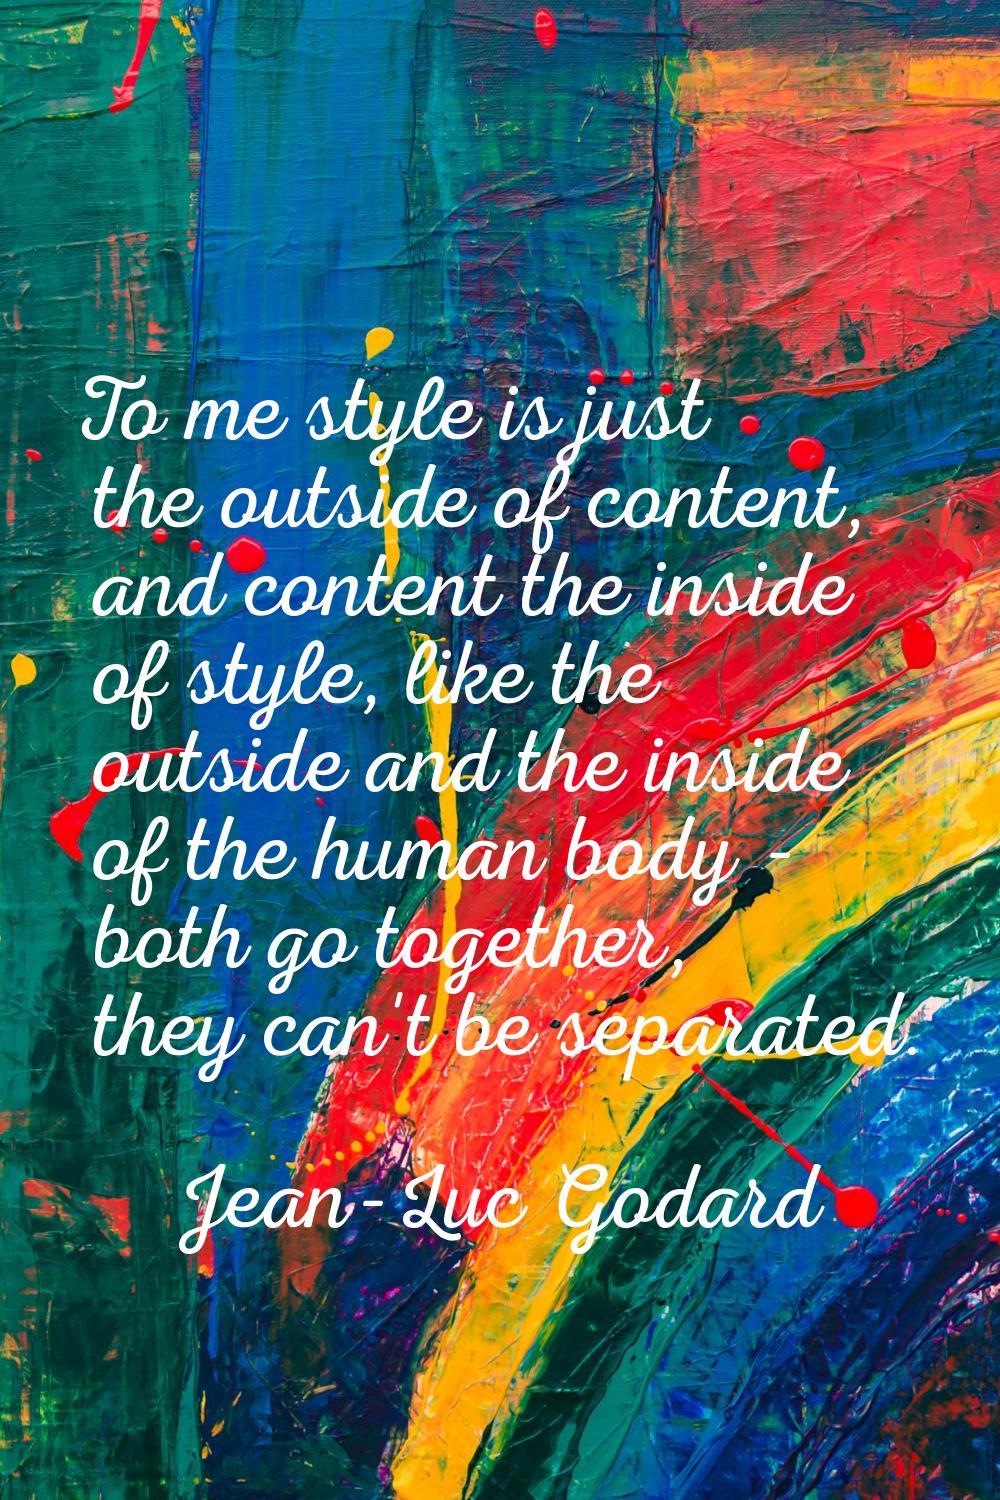 To me style is just the outside of content, and content the inside of style, like the outside and t